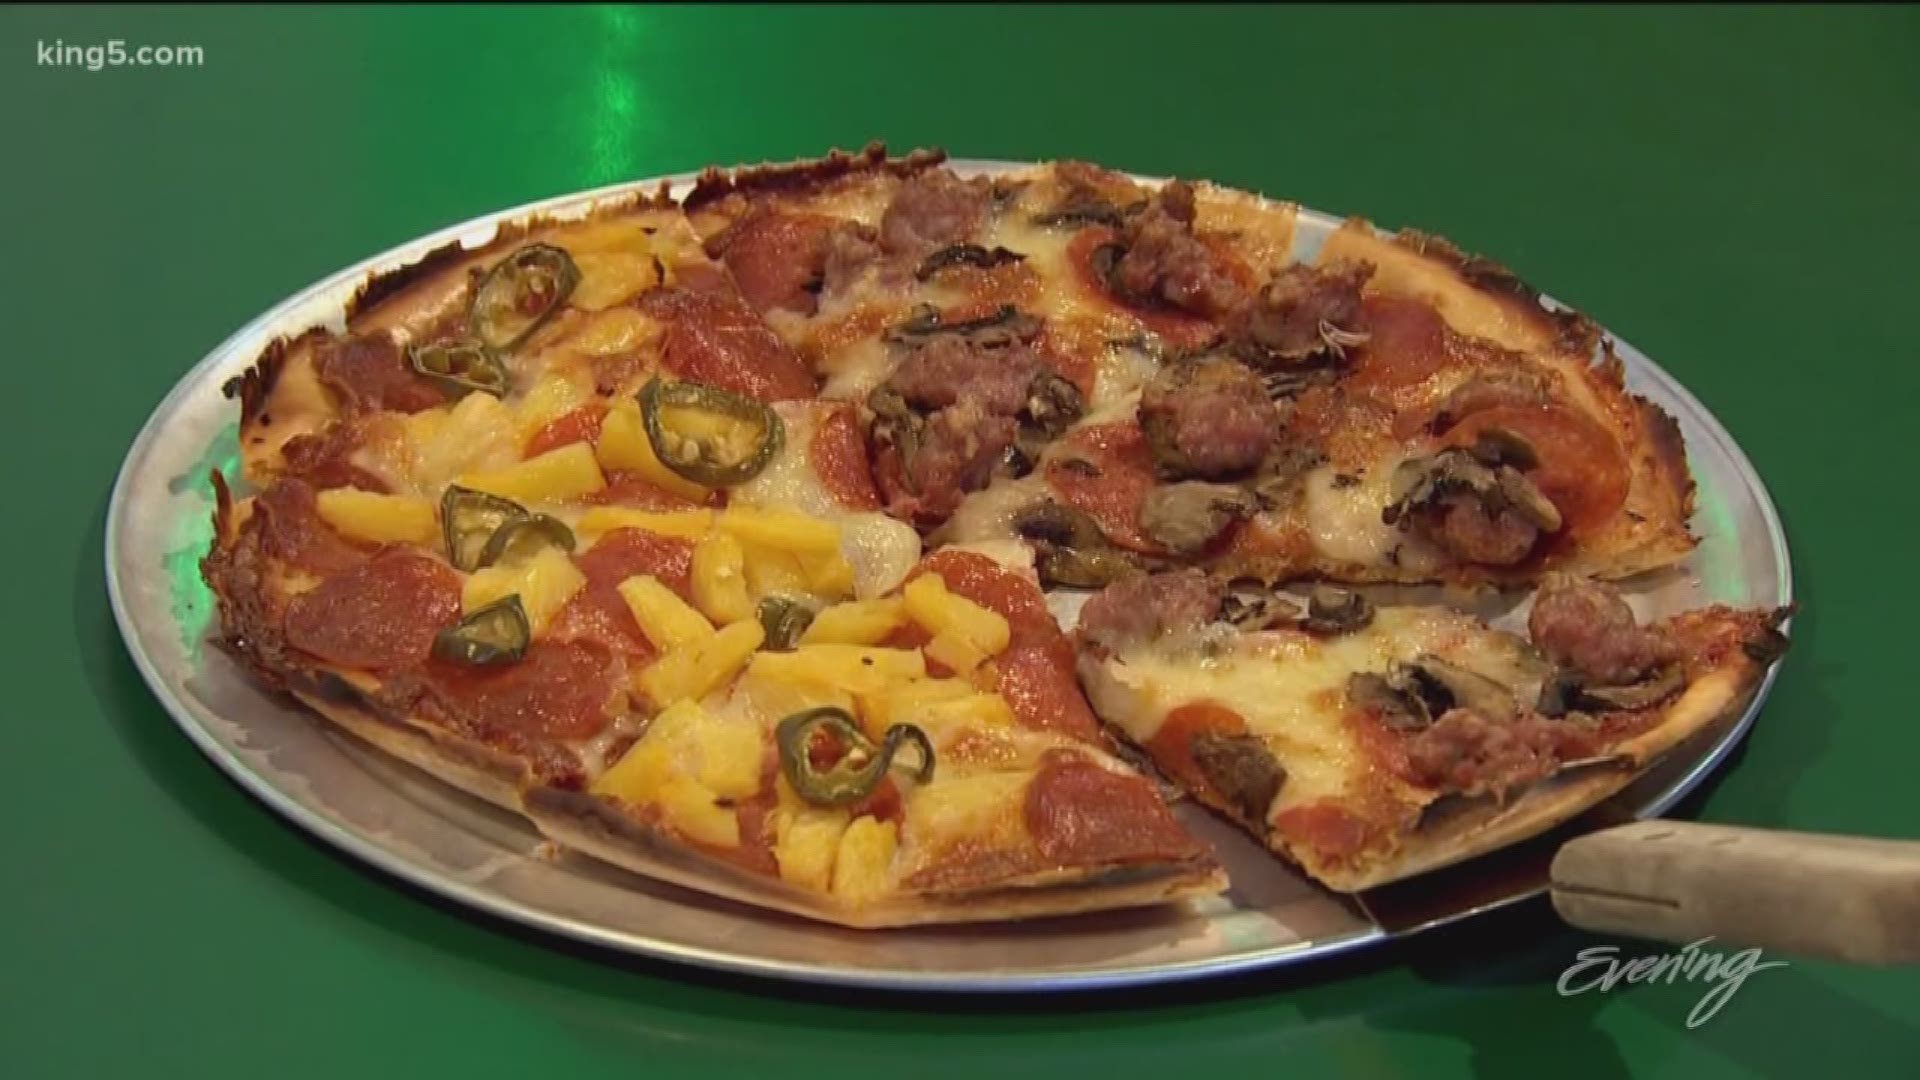 Friendly dive bar with a pizza that earns its fame from its unique thin crust.